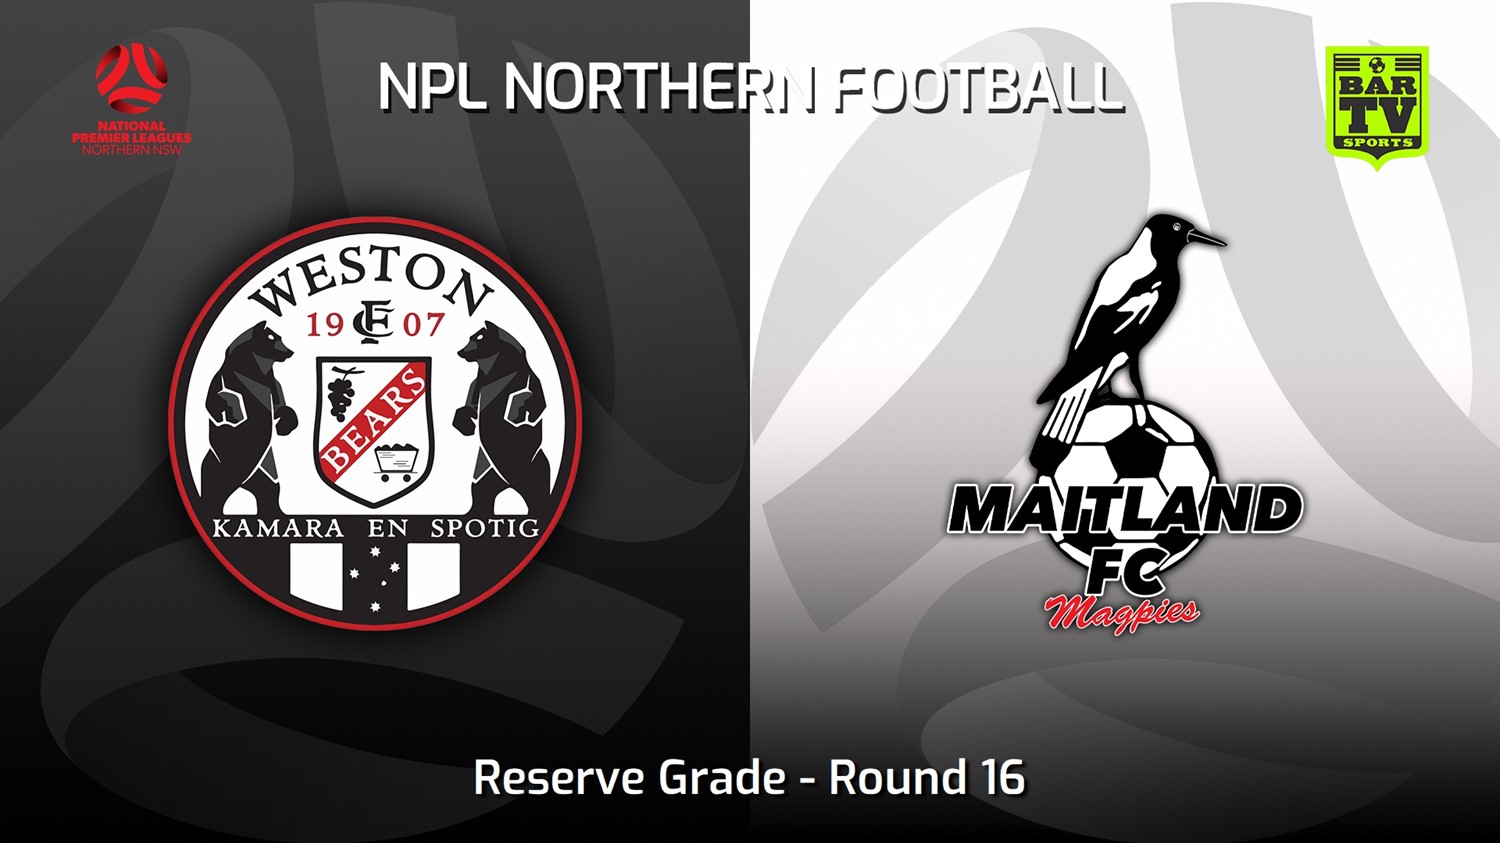 230625-NNSW NPLM Res Round 16 - Weston Workers FC Res v Maitland FC Res Minigame Slate Image